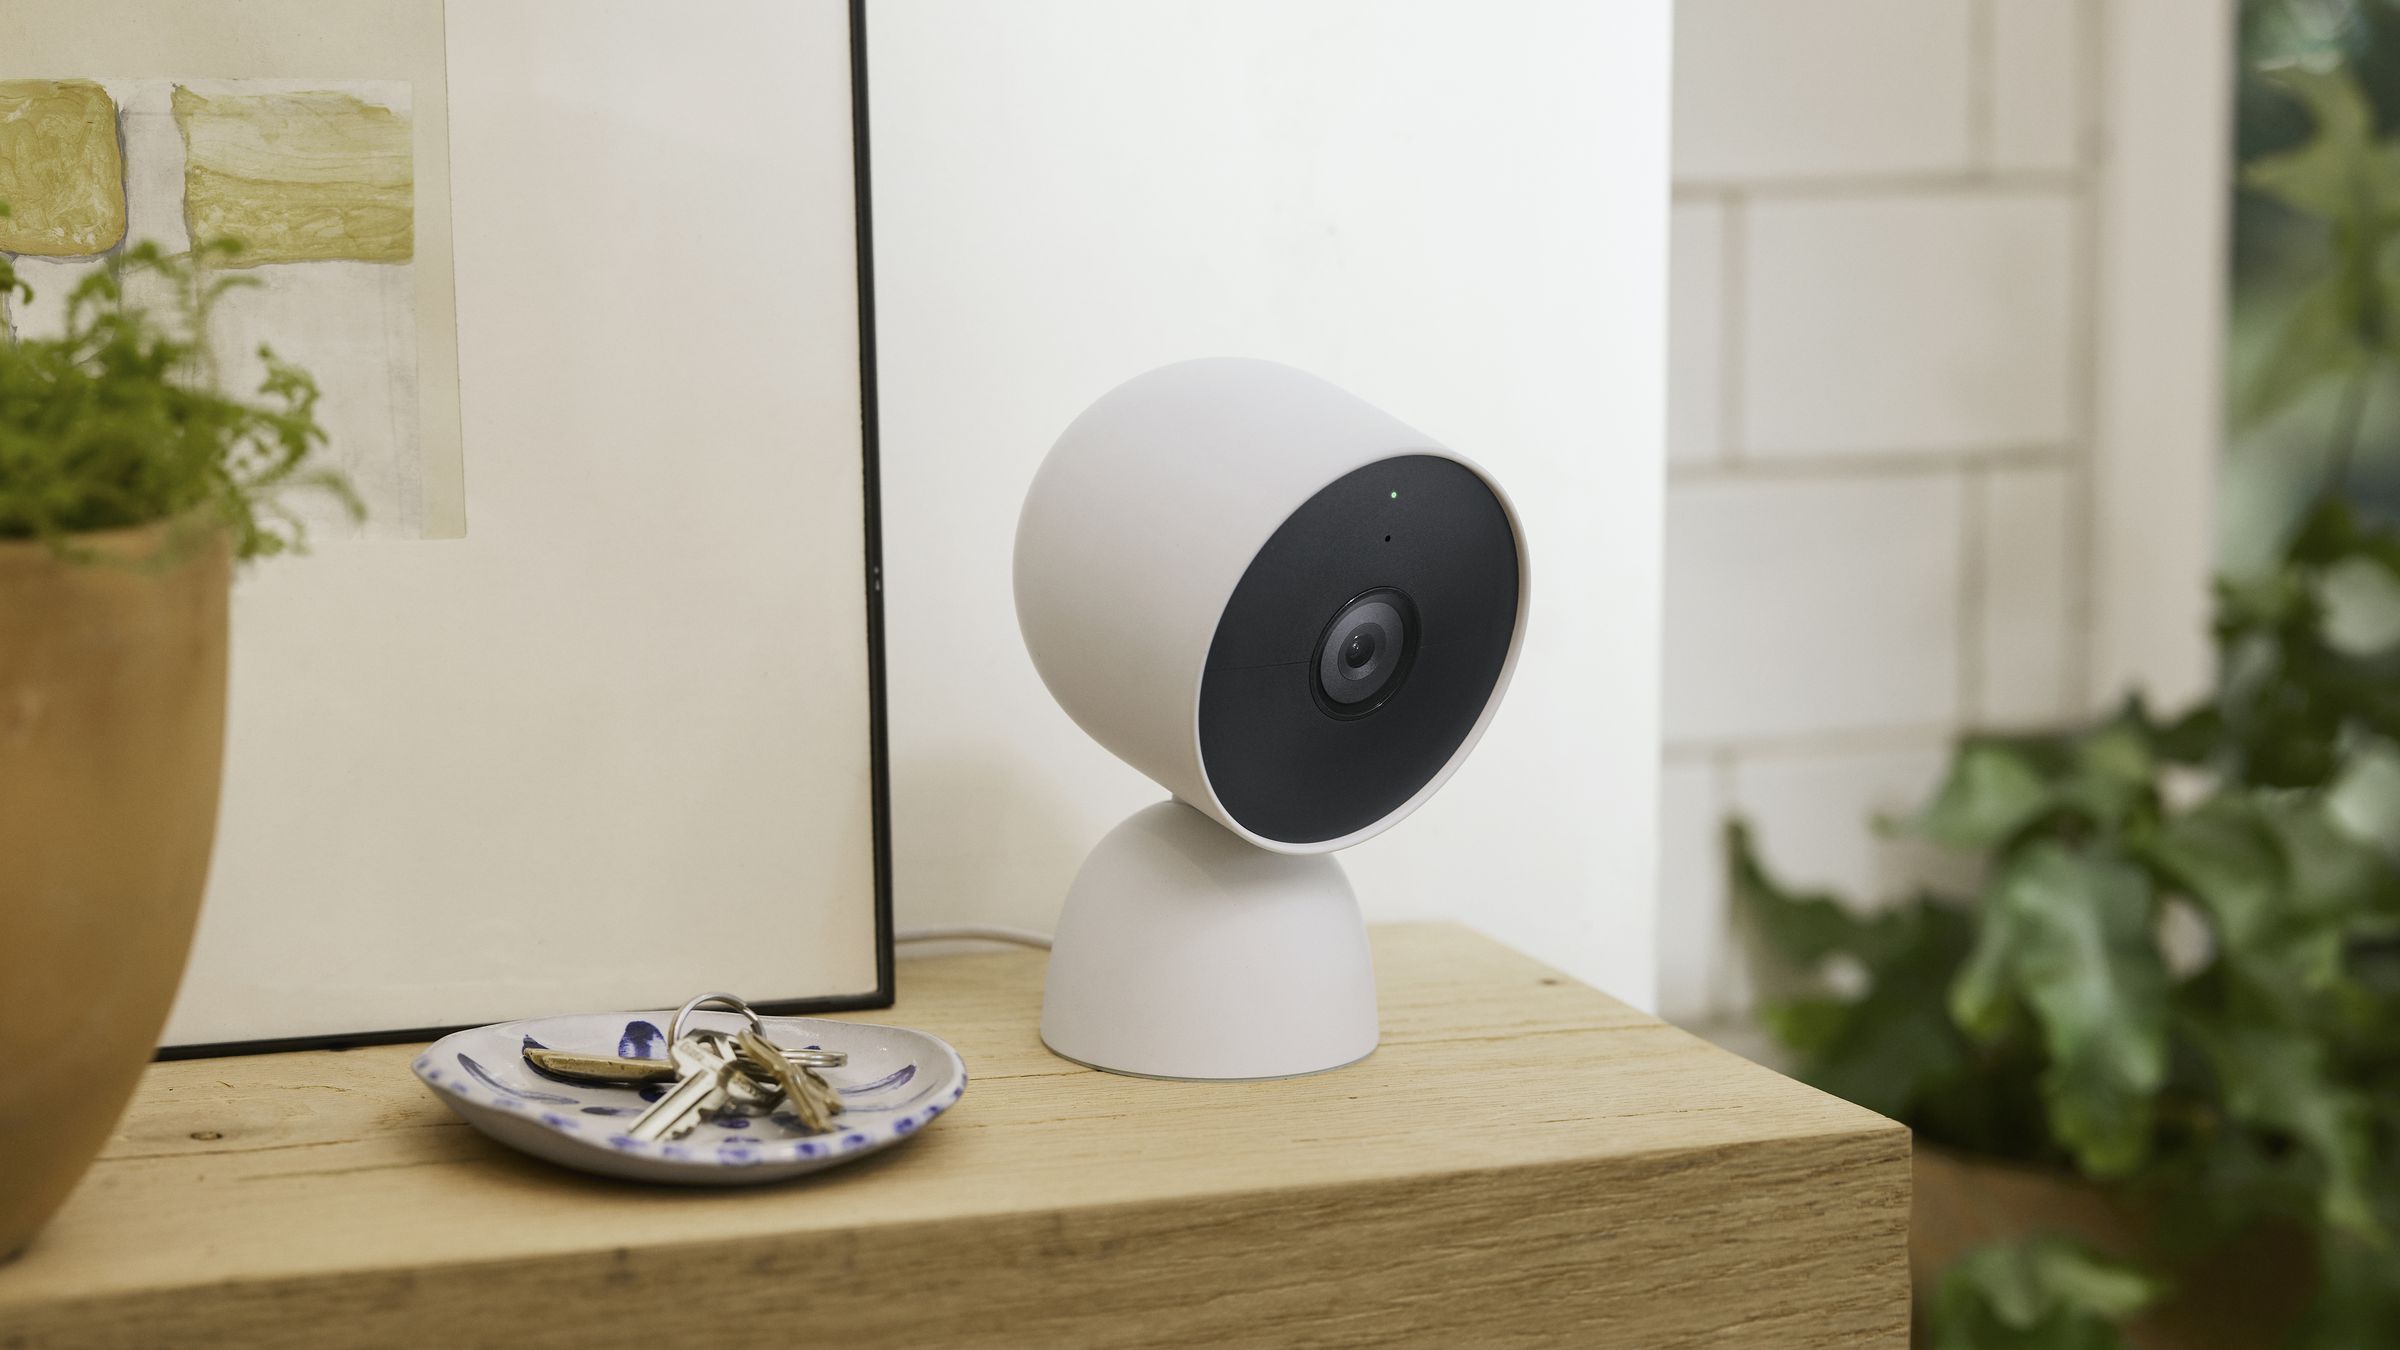 The Nest Cam’s magnetic base makes it easy to mount to a wall or place on a shelf.